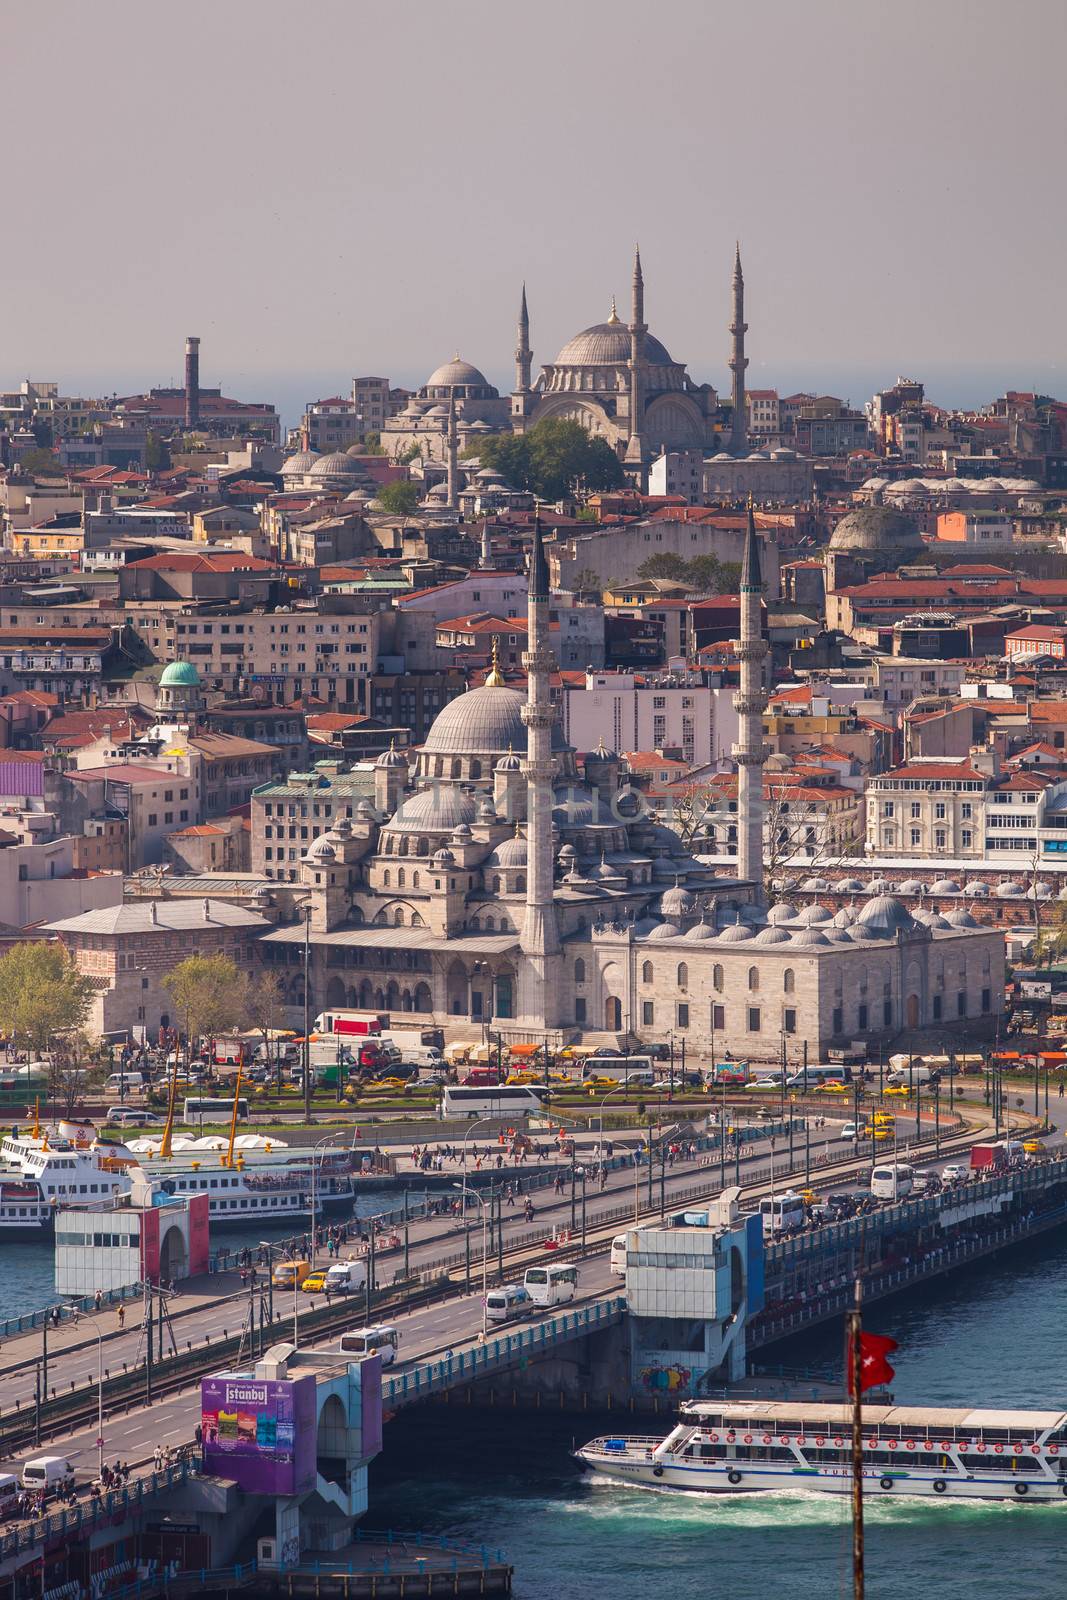 ISTANBUL, TURKEY ��� APRIL 28: The New Mosque and neighborhoods along the Bosphorus on April 28, 2012 in Istanbul, Turkey prior to Anzac Day.  The Bosphorus divides Turkey between Europe and Asia.  